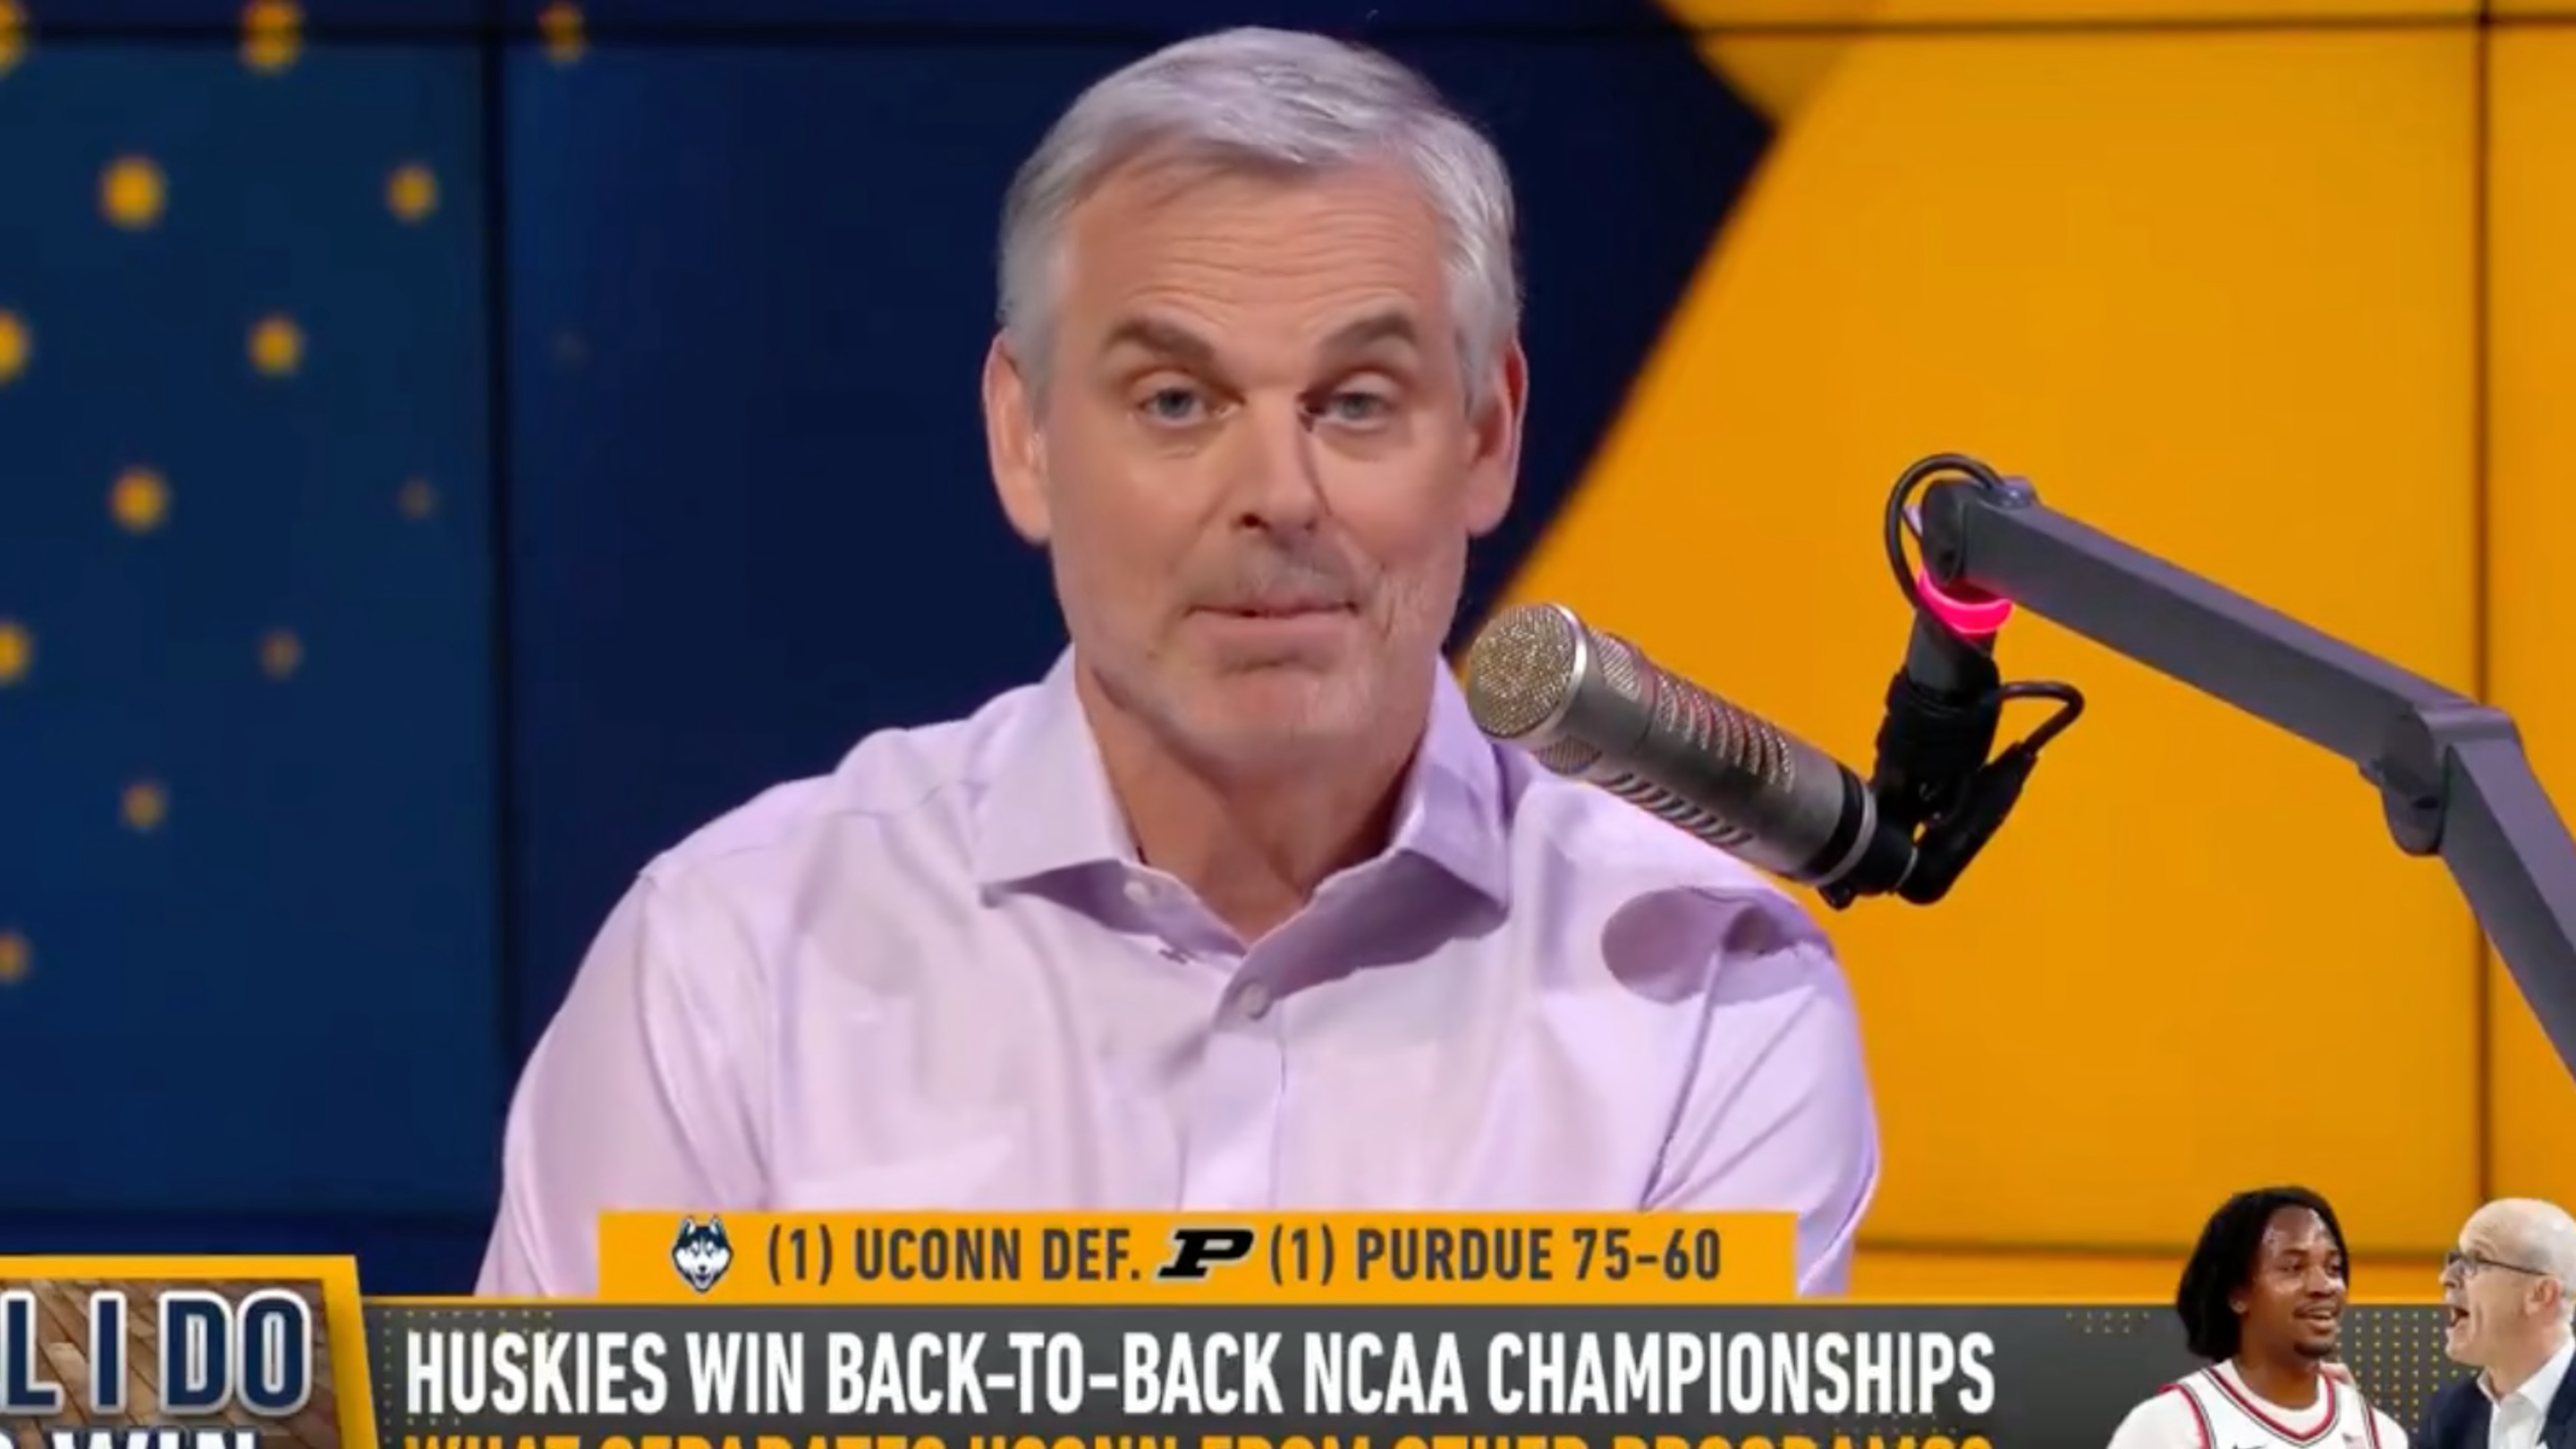 Colin Cowherd Reached Peak Colin Cowherd by Comparing UConn to
'Oppenheimer'